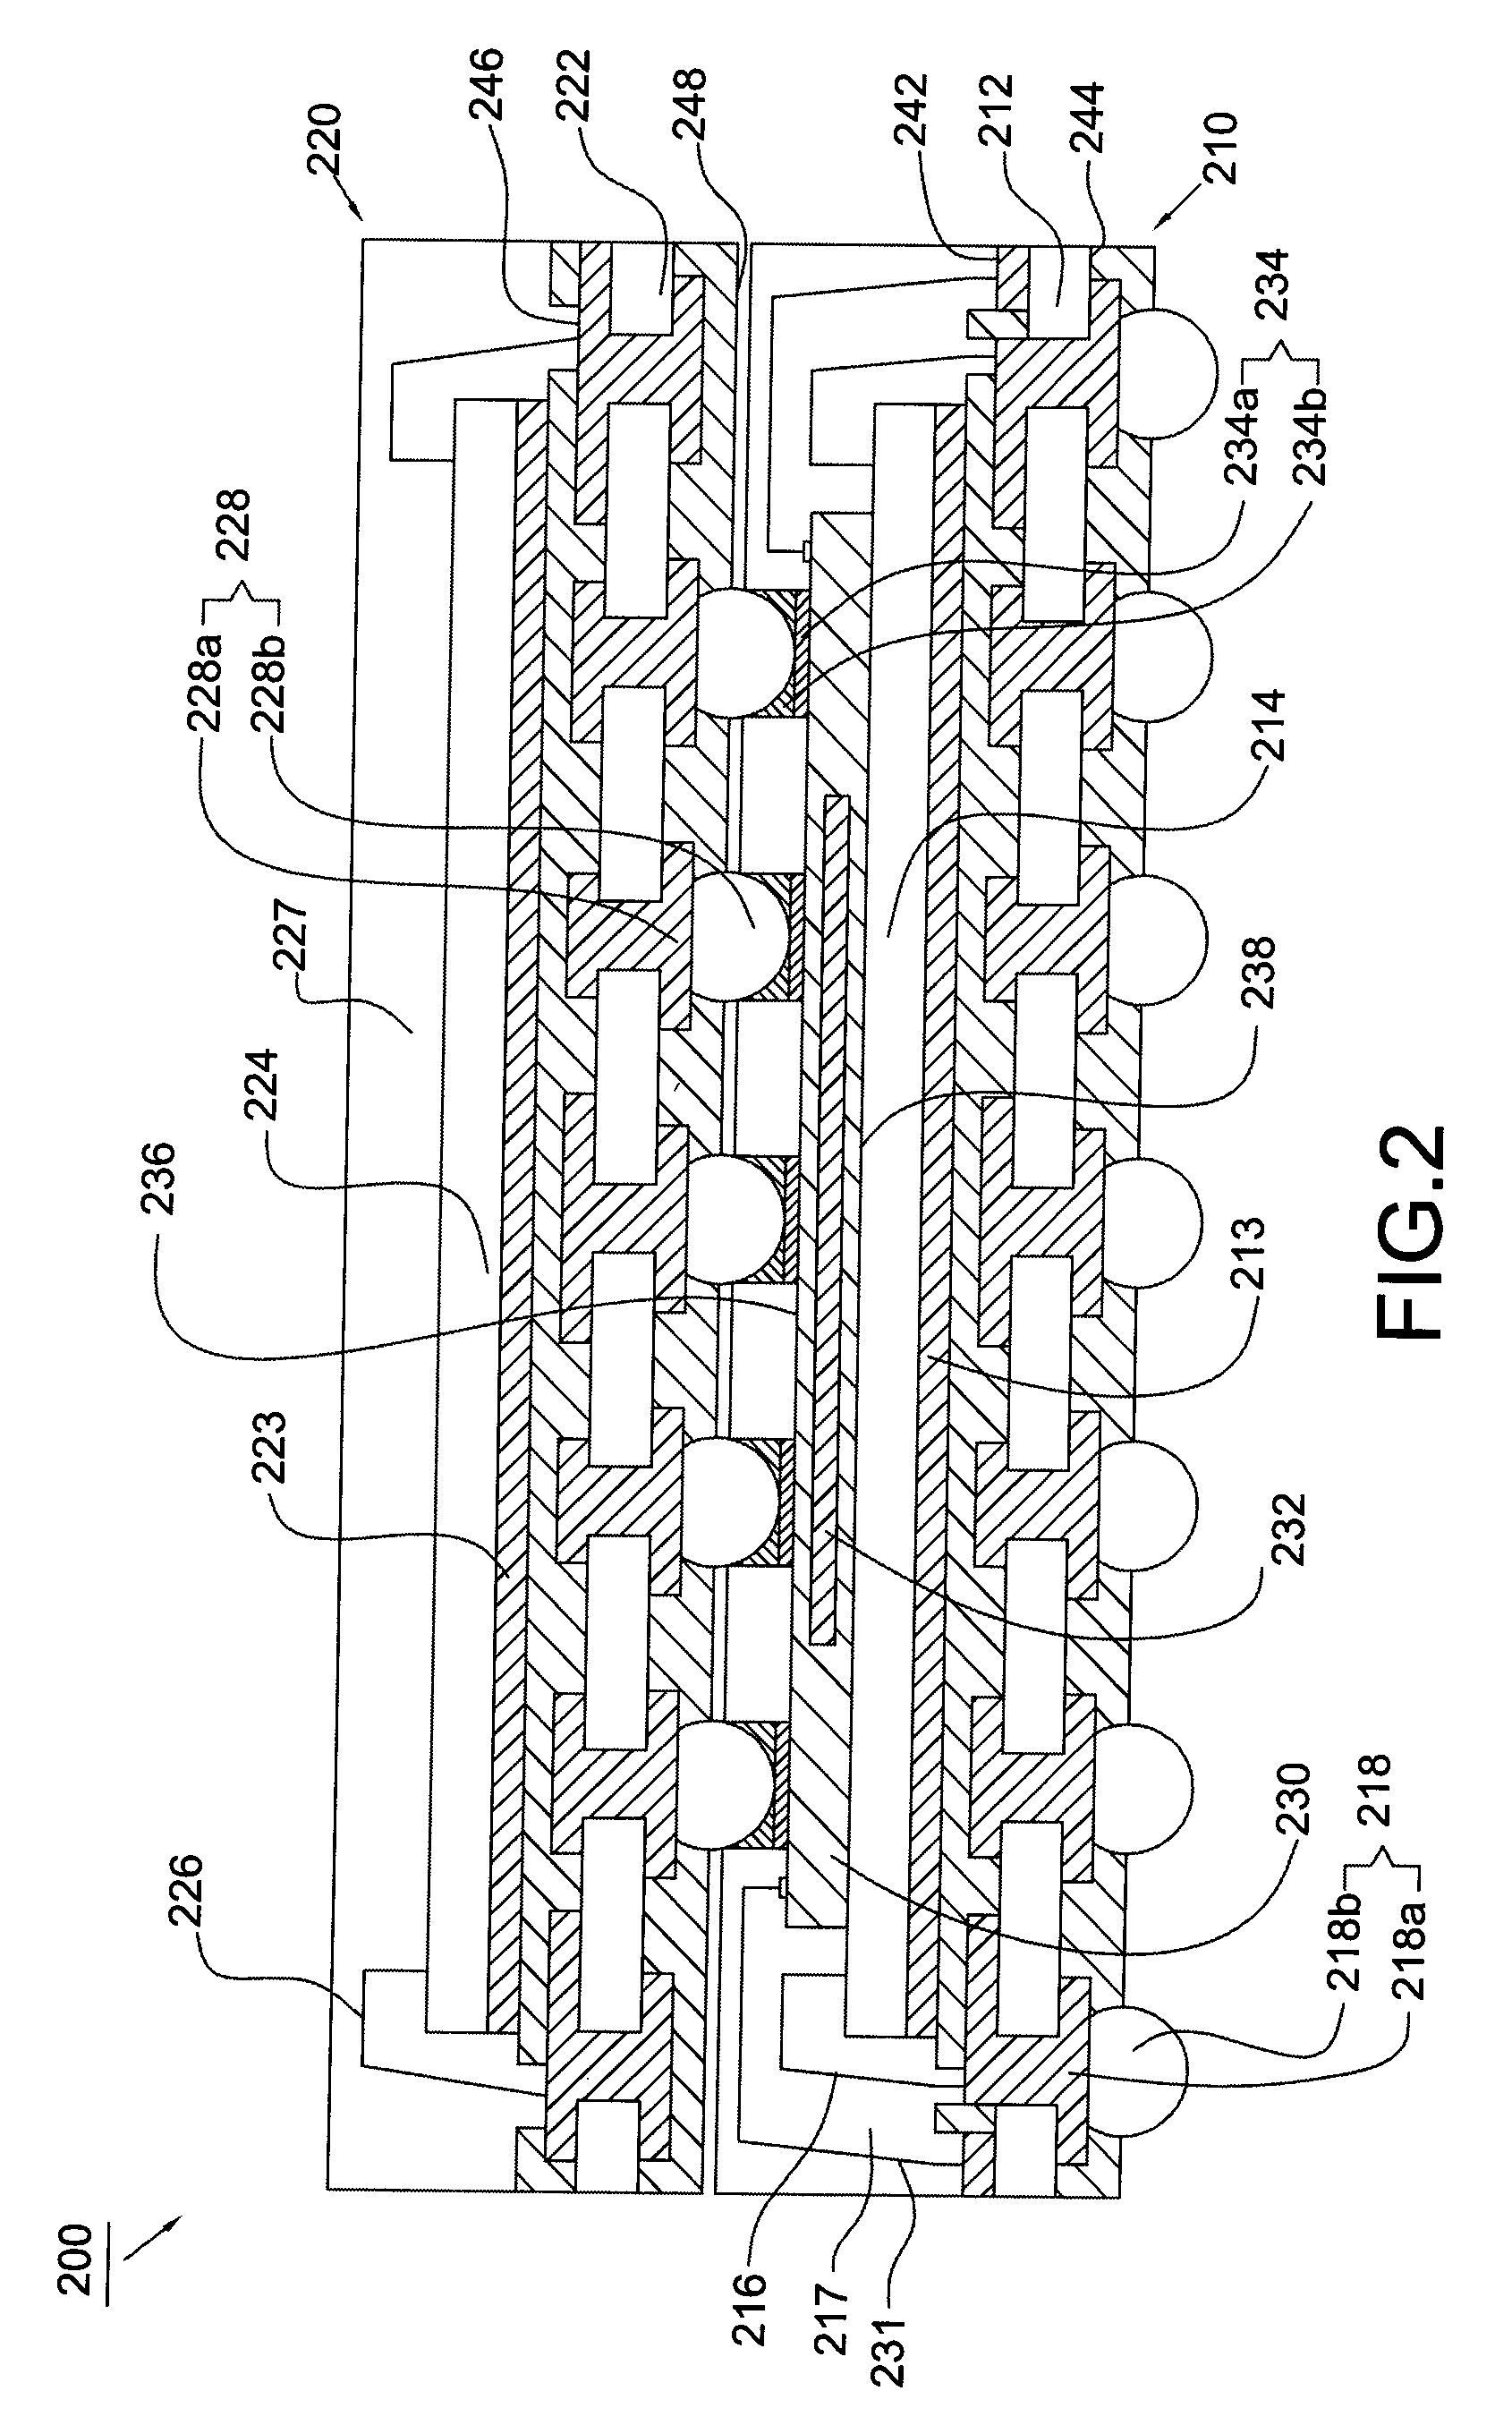 Package-on-package device, semiconductor package and method for manufacturing the same